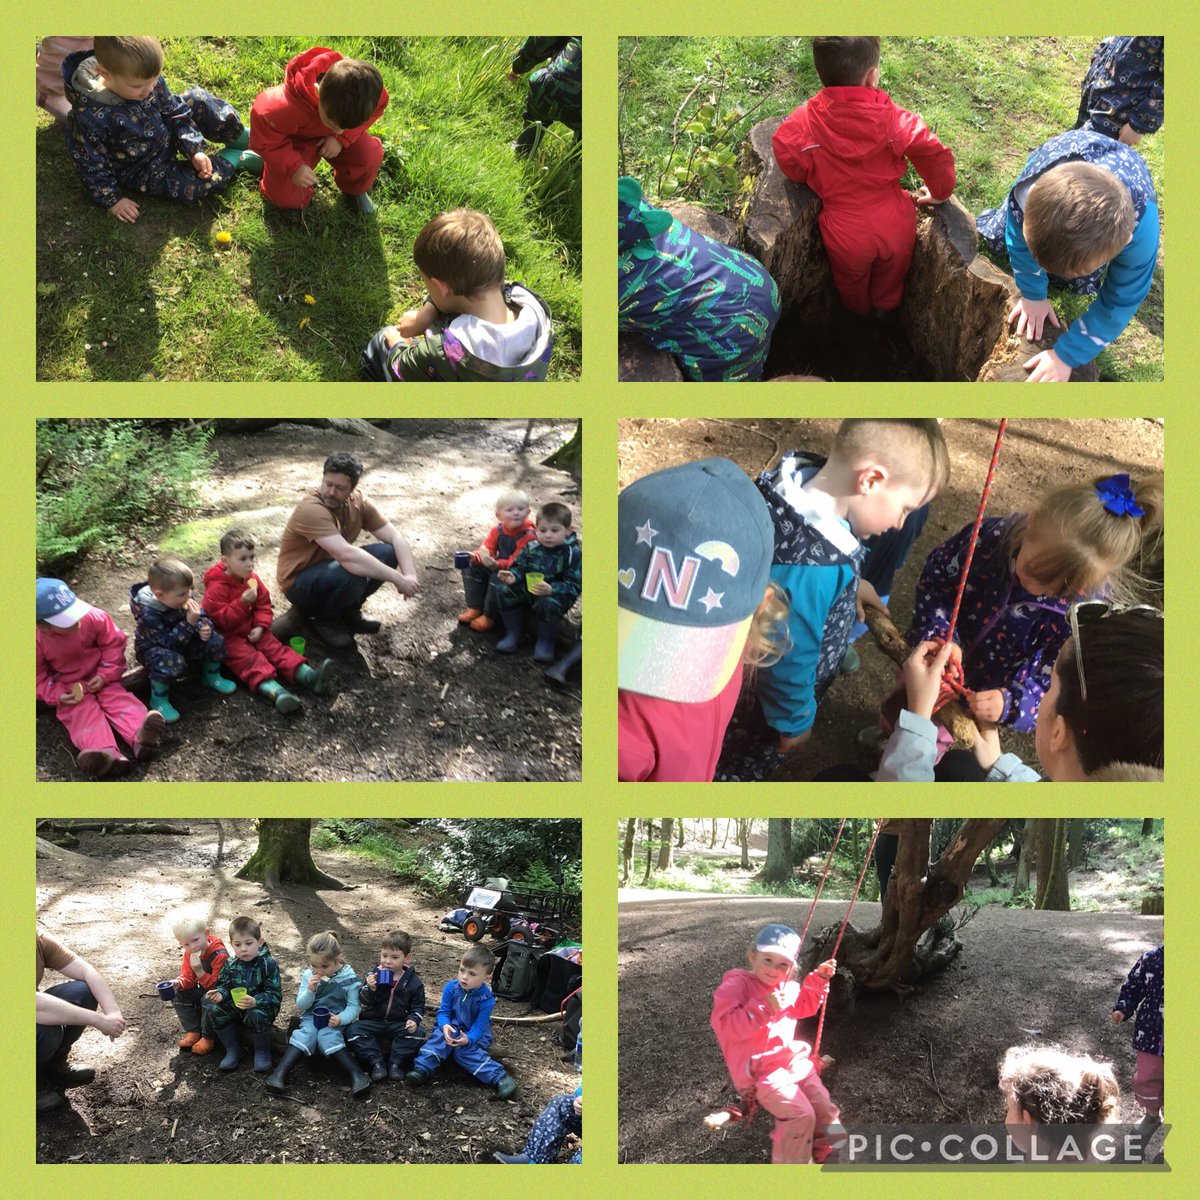 What another fantastic day exploring Callendar woods and making new friends with @hub_woodlands.We went on a nature walk,climbed hills and we loved helping to build a tree swing!Lunch in the sun with our new friends was awesome! @airthprimary